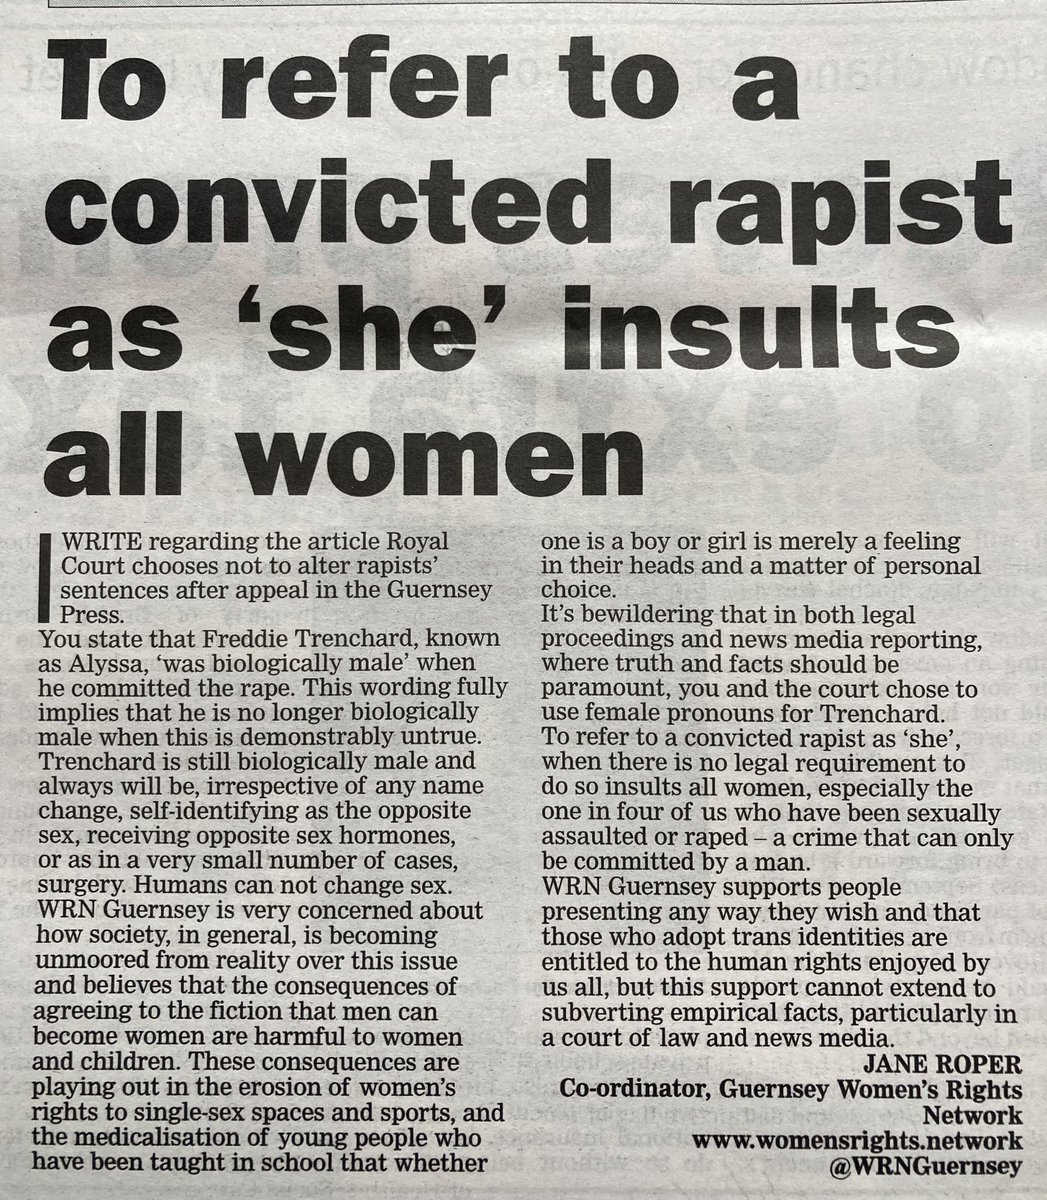 We're in the Guernsey Press again - setting the record straight on rapist Freddie Trenchard's sex. It's time that courts and news media stop pandering to the falsehood that men can become women and vice versa